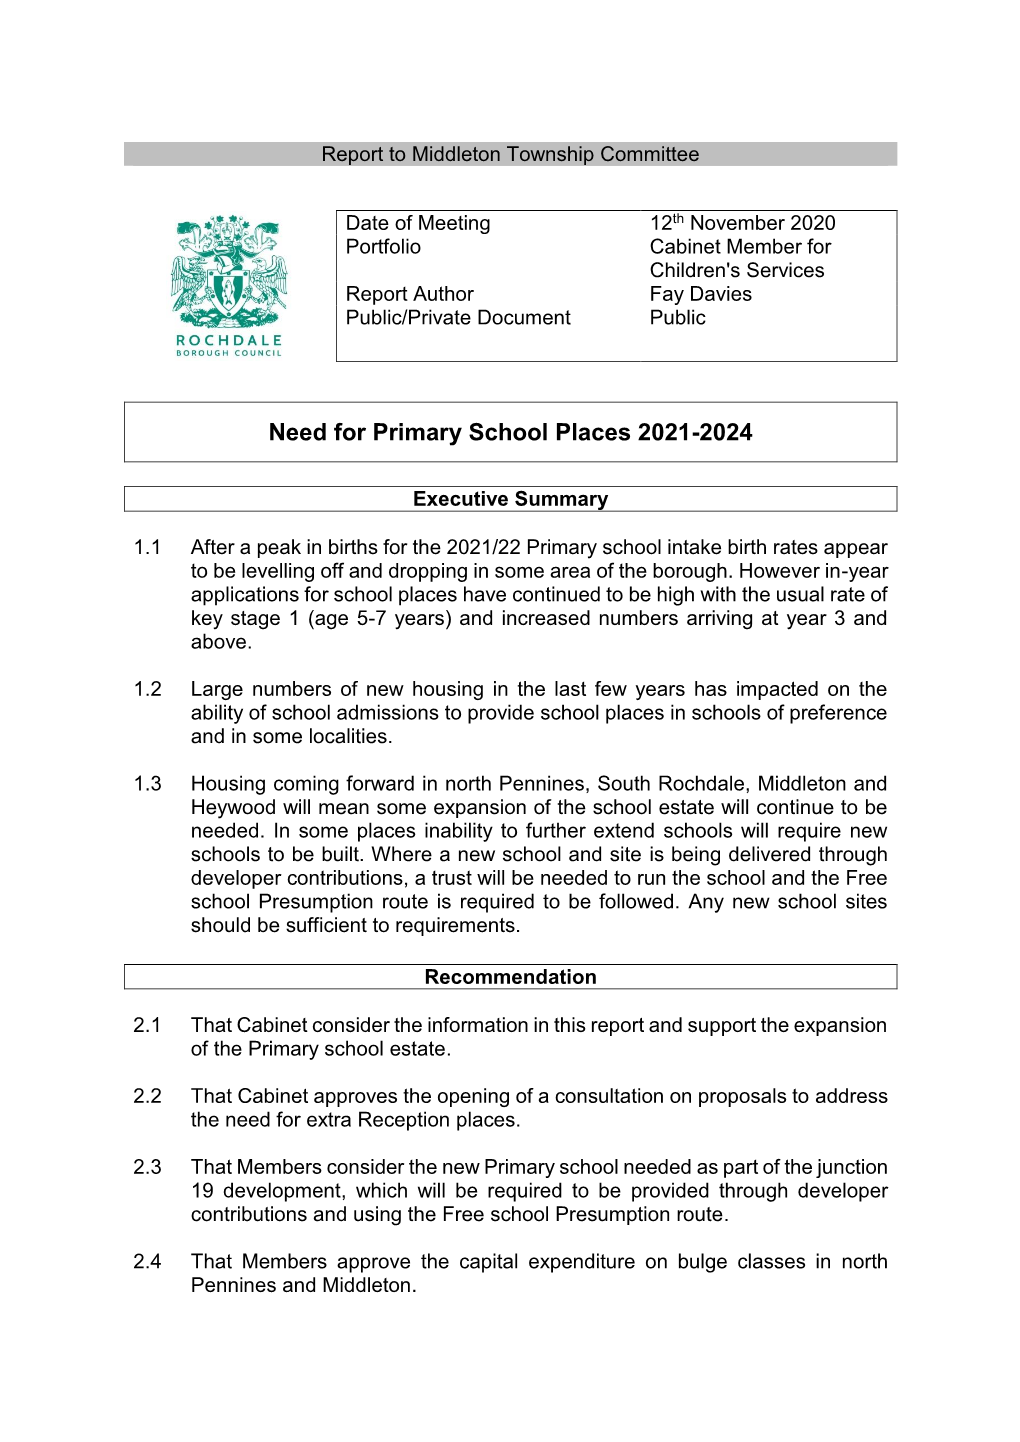 Need for Primary School Places 2021-2024